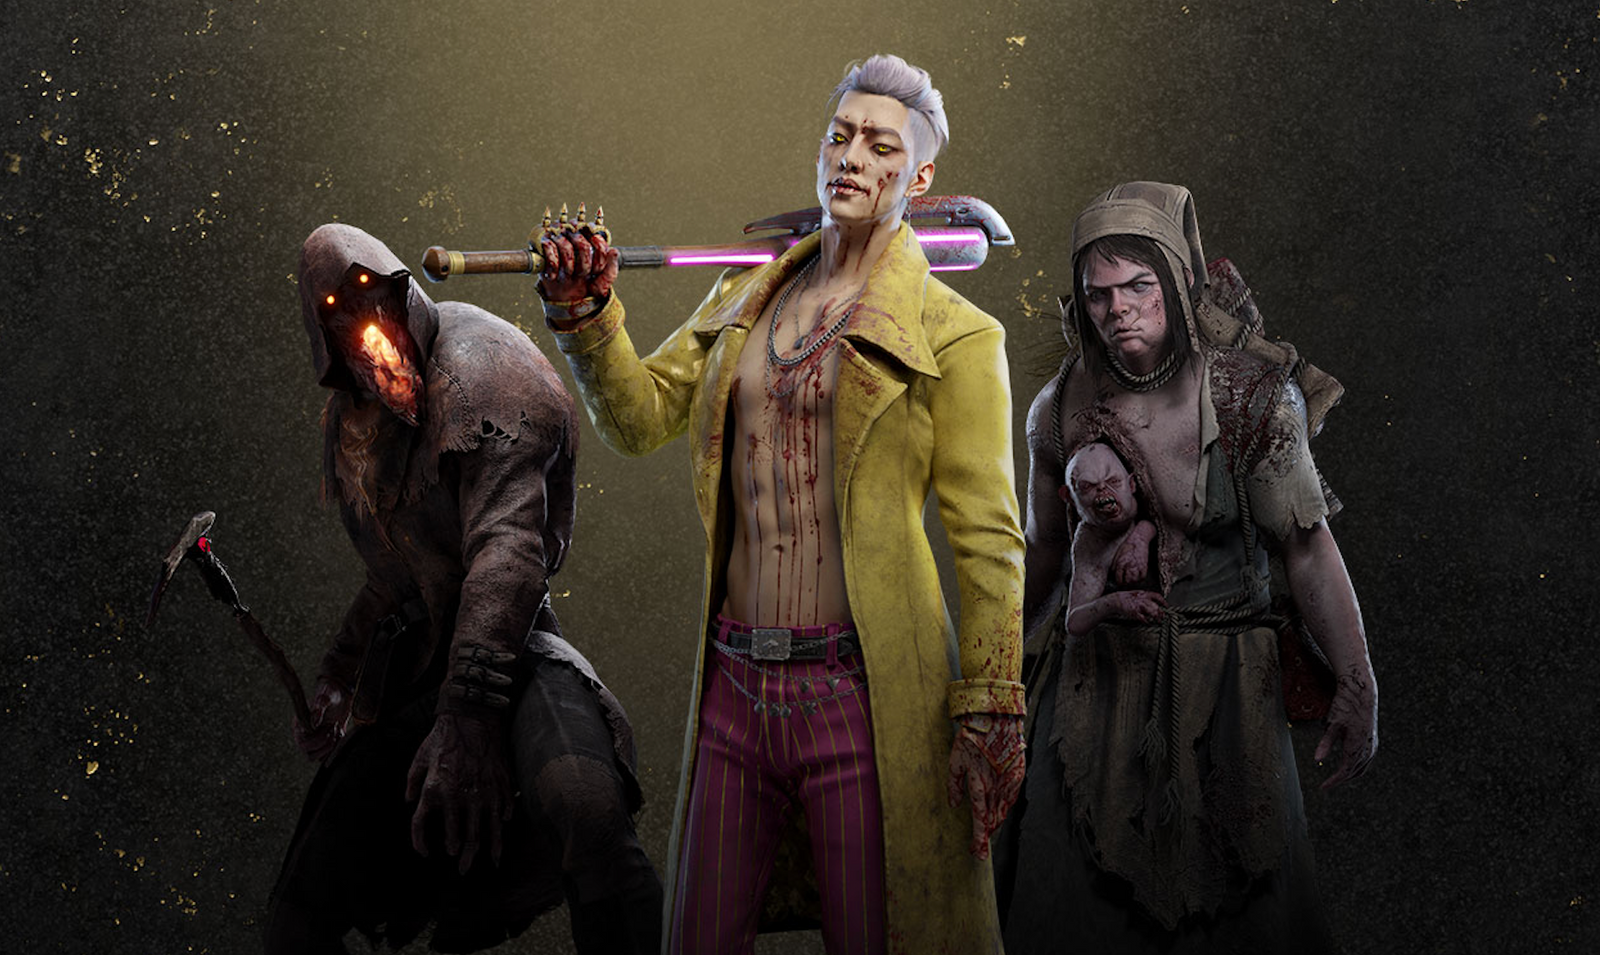 Dead by Daylight reveals modern tech-driven chapter, Tools of Torment